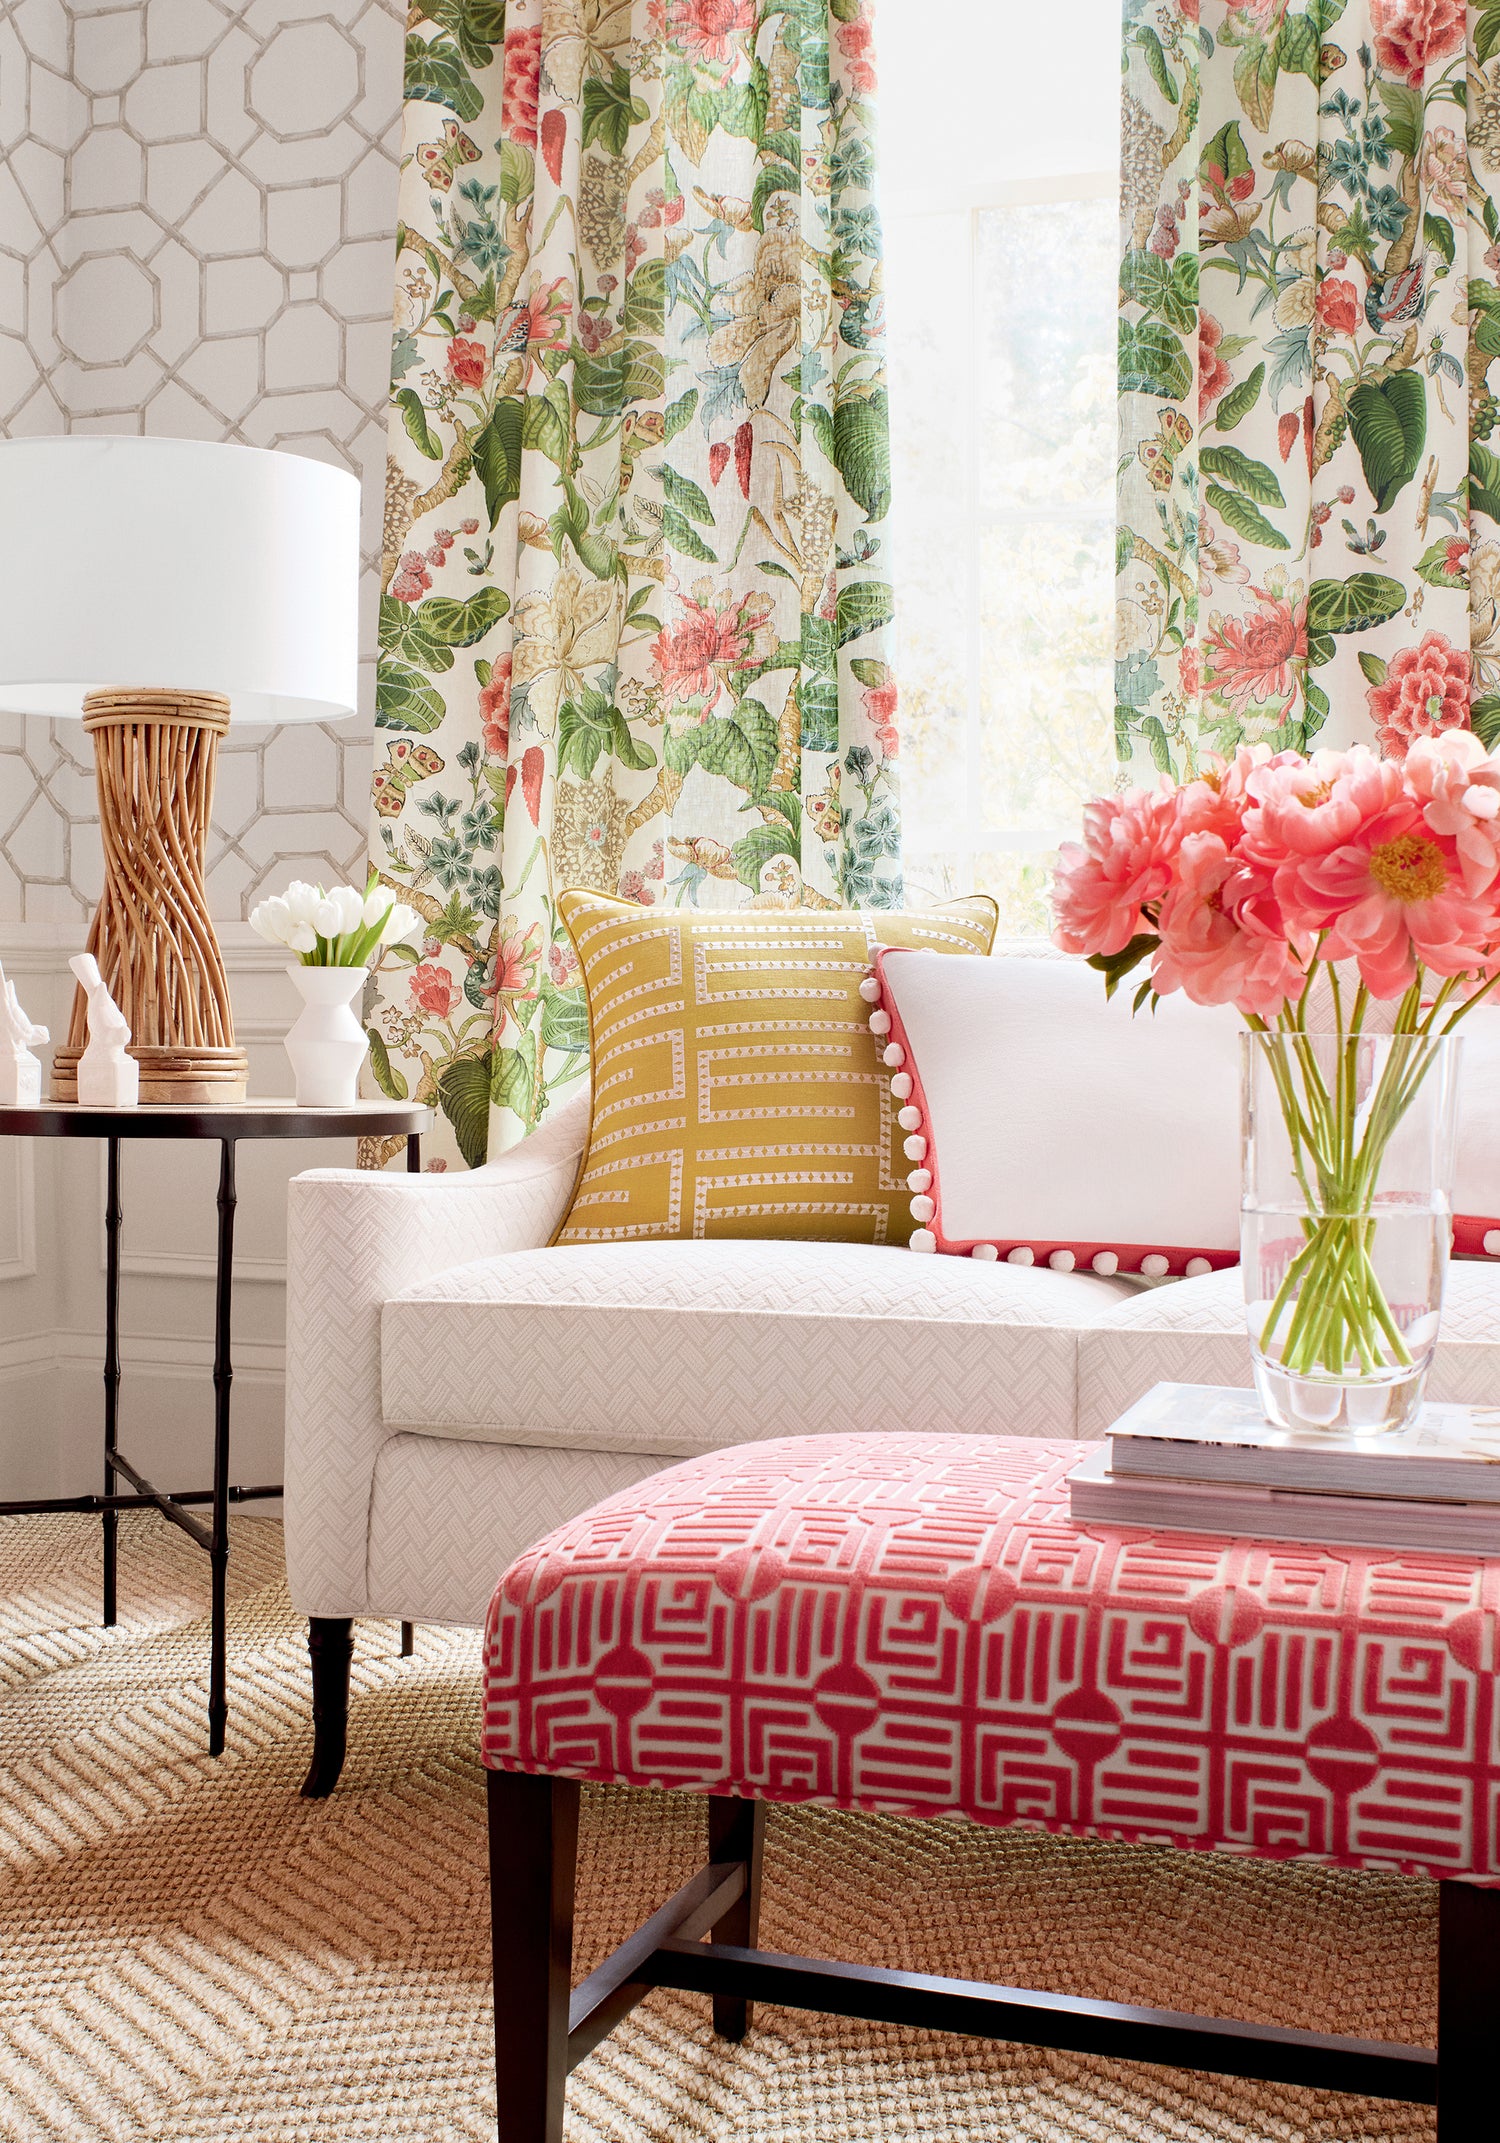 Living room with Draperies in Thibaut Hill Garden printed fabric in Coral and Green color